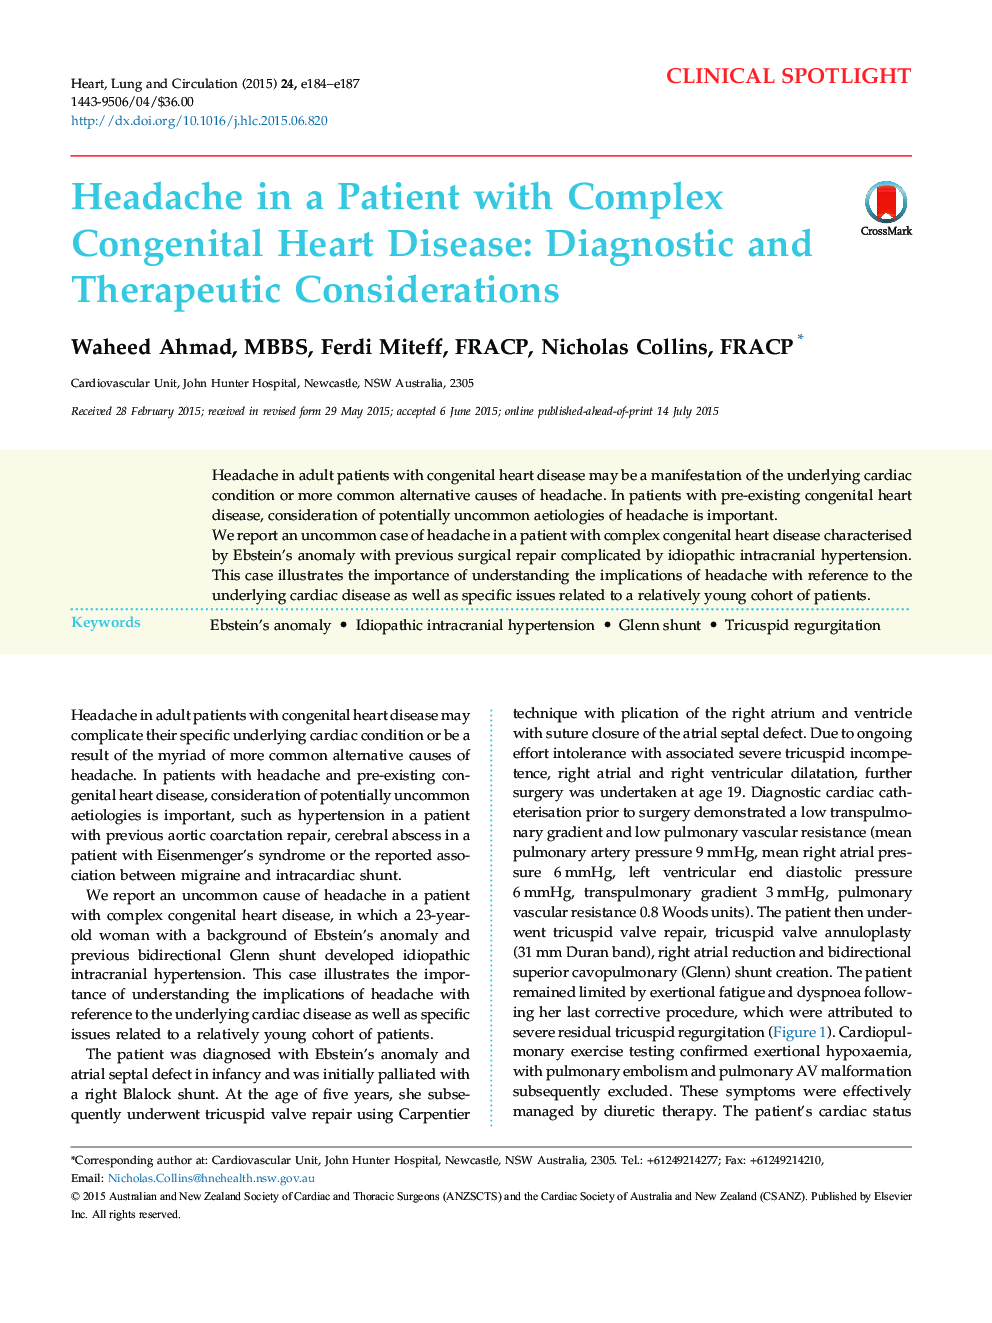 Headache in a Patient with Complex Congenital Heart Disease: Diagnostic and Therapeutic Considerations